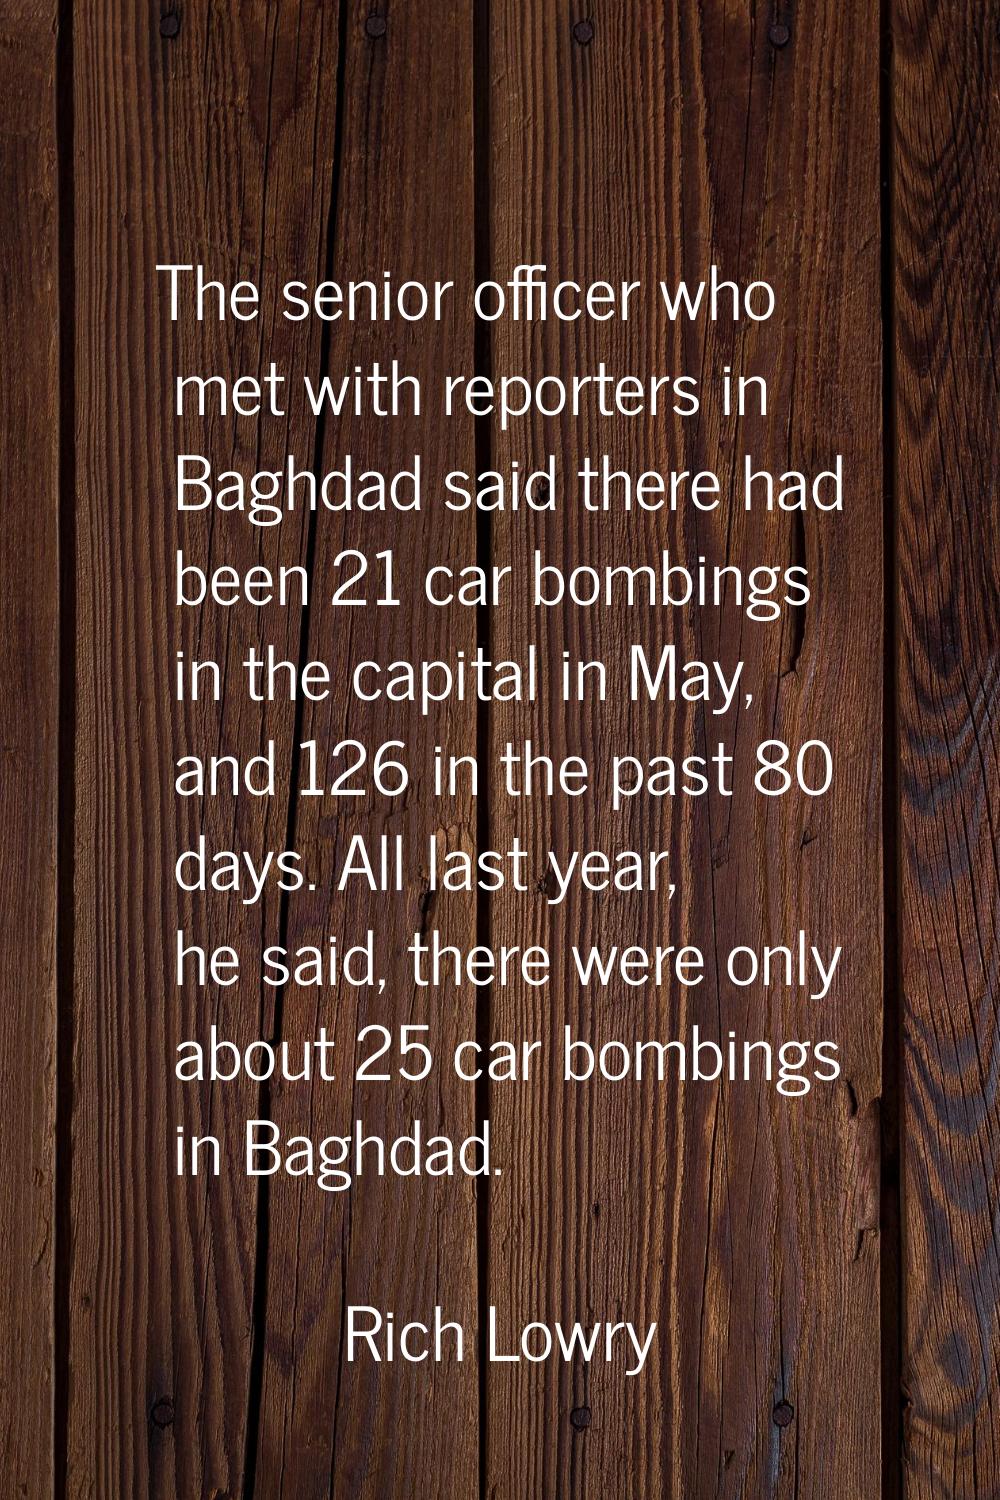 The senior officer who met with reporters in Baghdad said there had been 21 car bombings in the cap